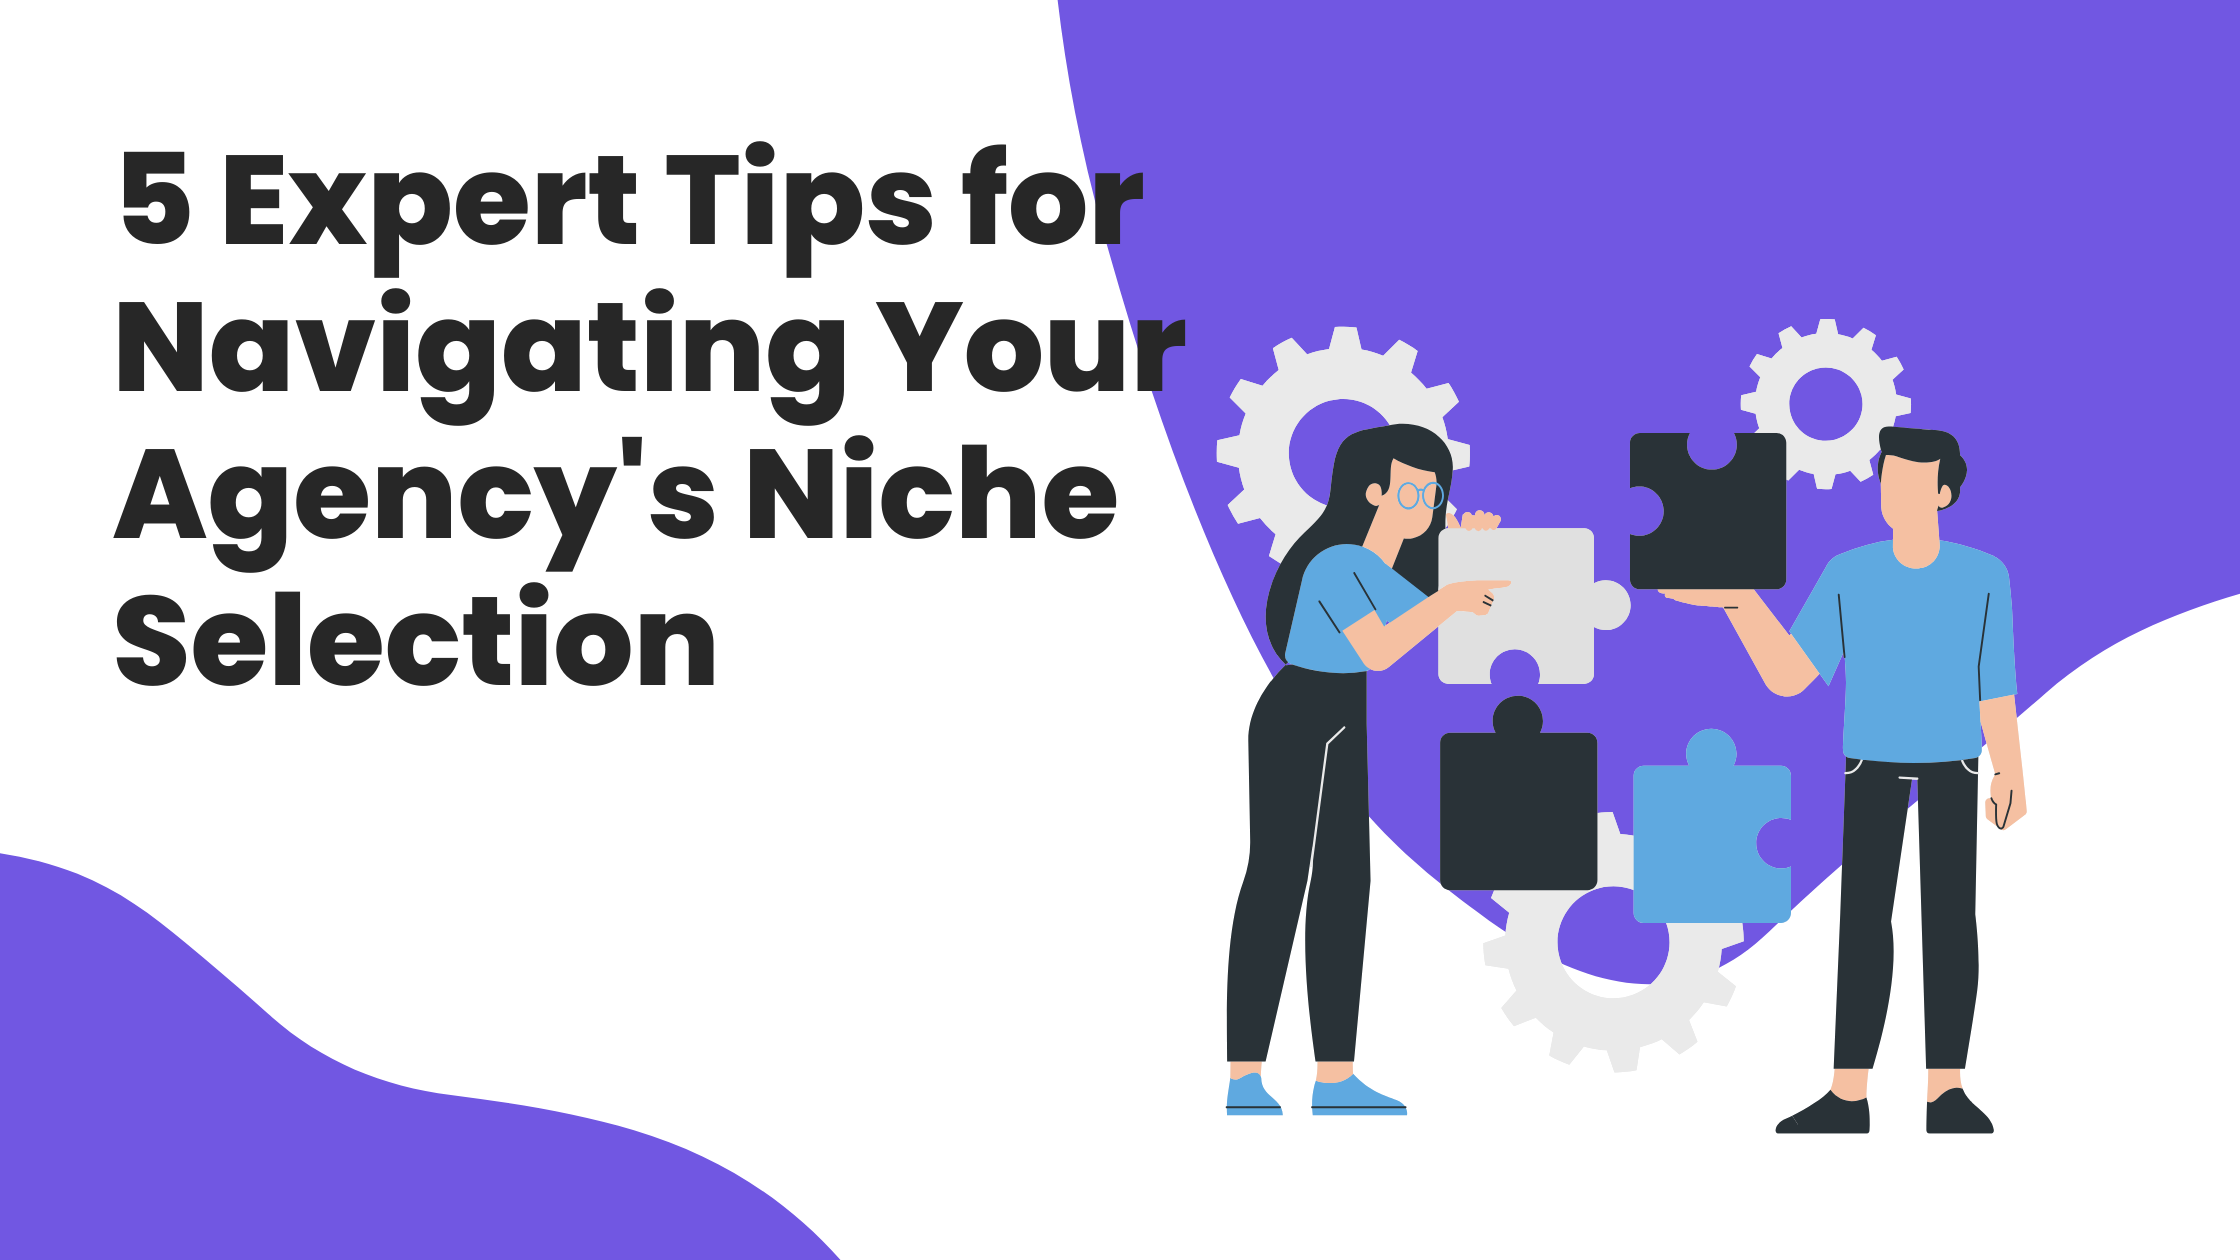 5 Expert Tips for Navigating Your Agency's Niche Selection